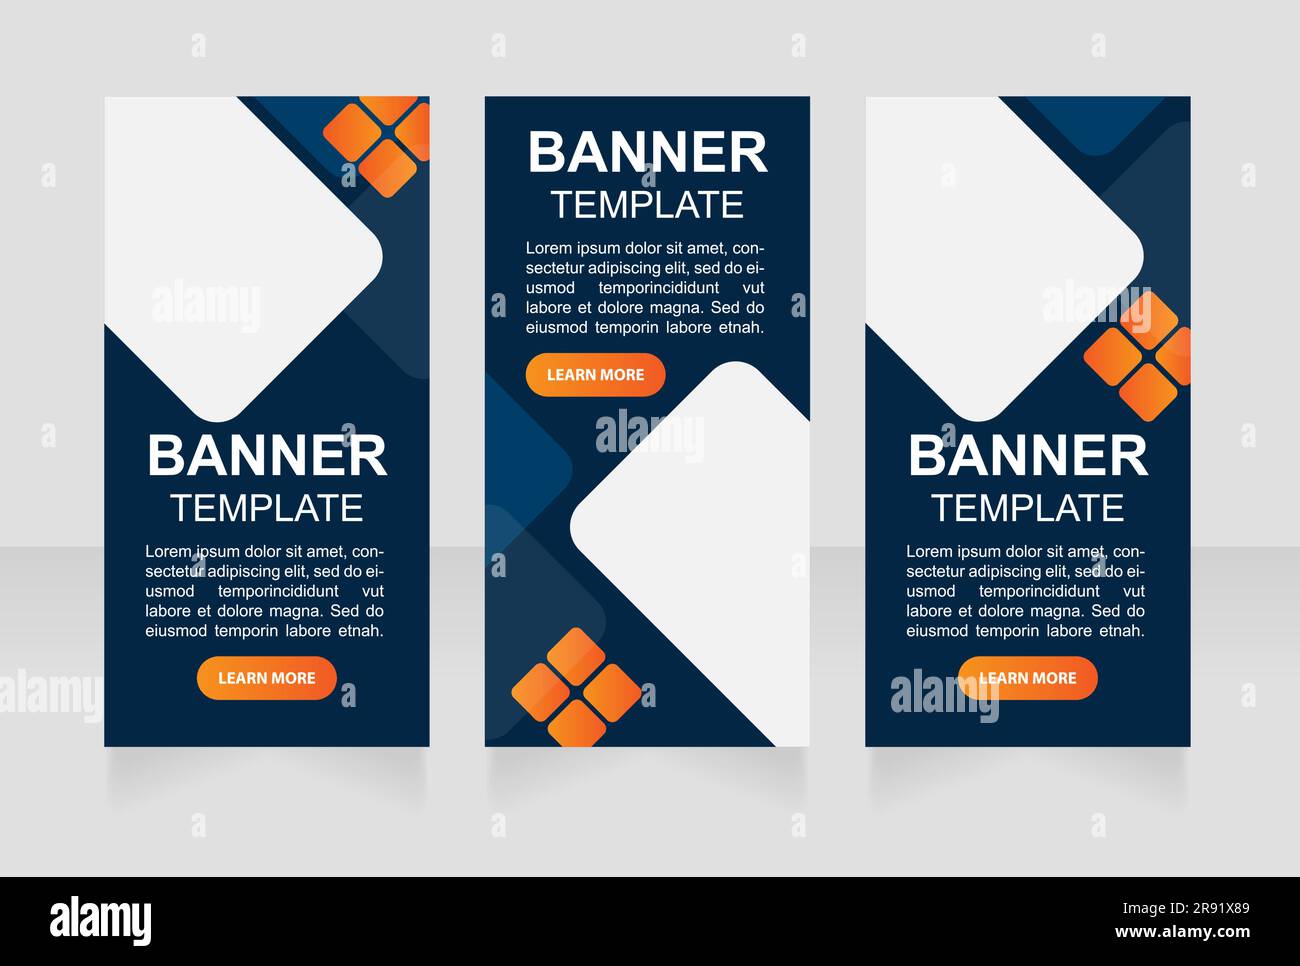 Abstract Website Launch Poster | BrandCrowd Poster Maker | BrandCrowd